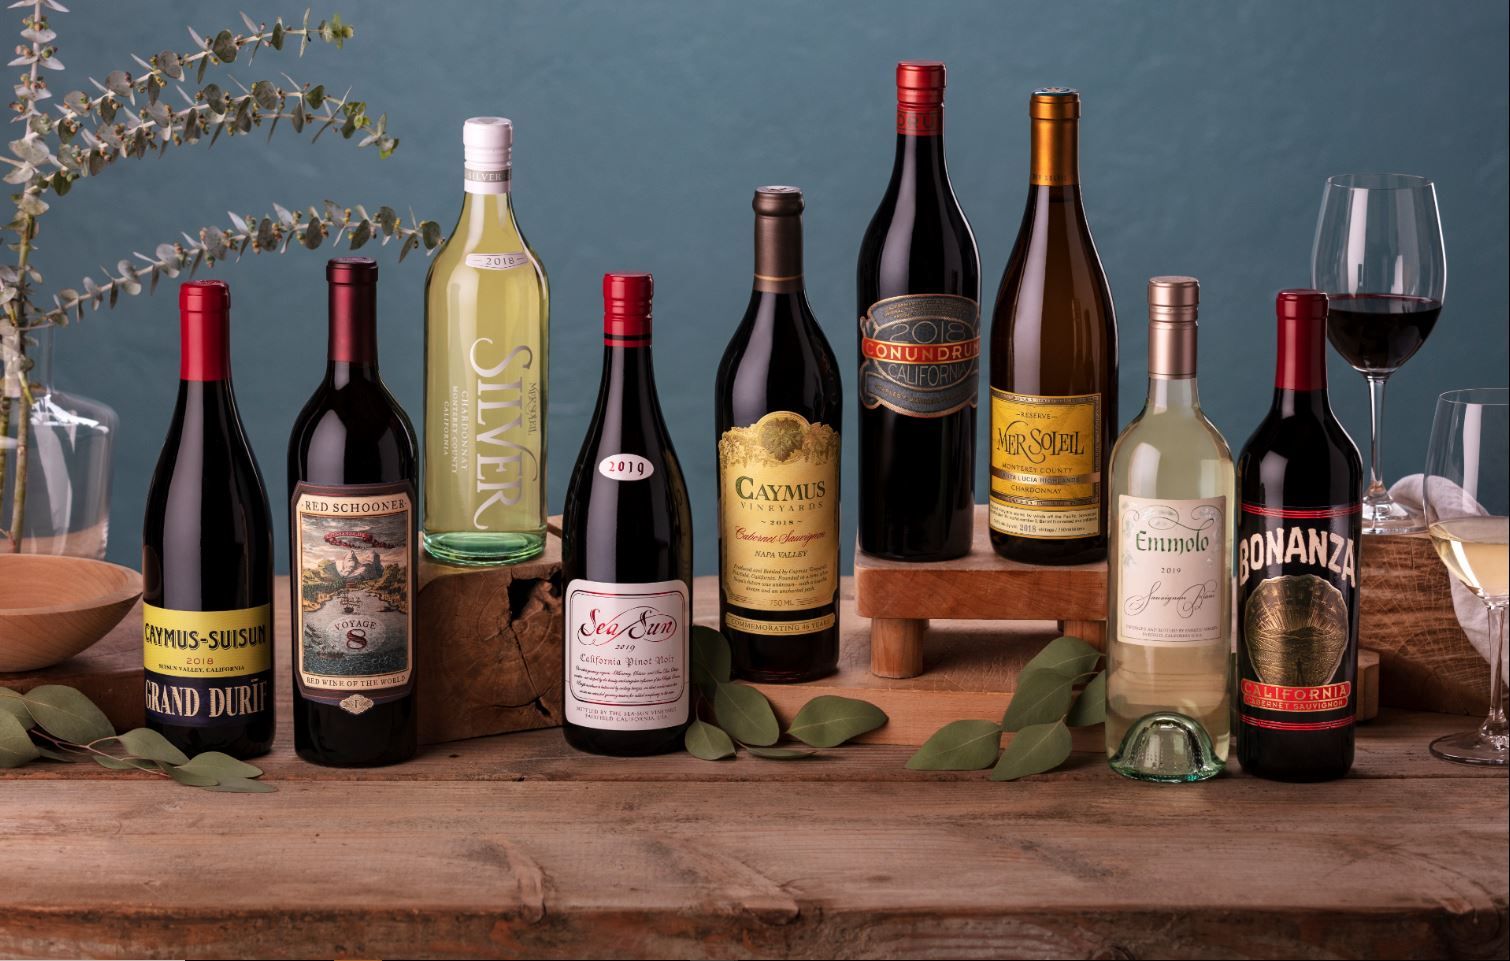 The Bacchus Group on Twitter: "We are proud to welcome the Napa Valley's  renowned Wagner Family of Wine into the Bacchus Group family. @caymuscab  @MerSoleilWines @EmmoloWines @ConundrumWines & more #CaymusVineyards  #NapaValley #California #